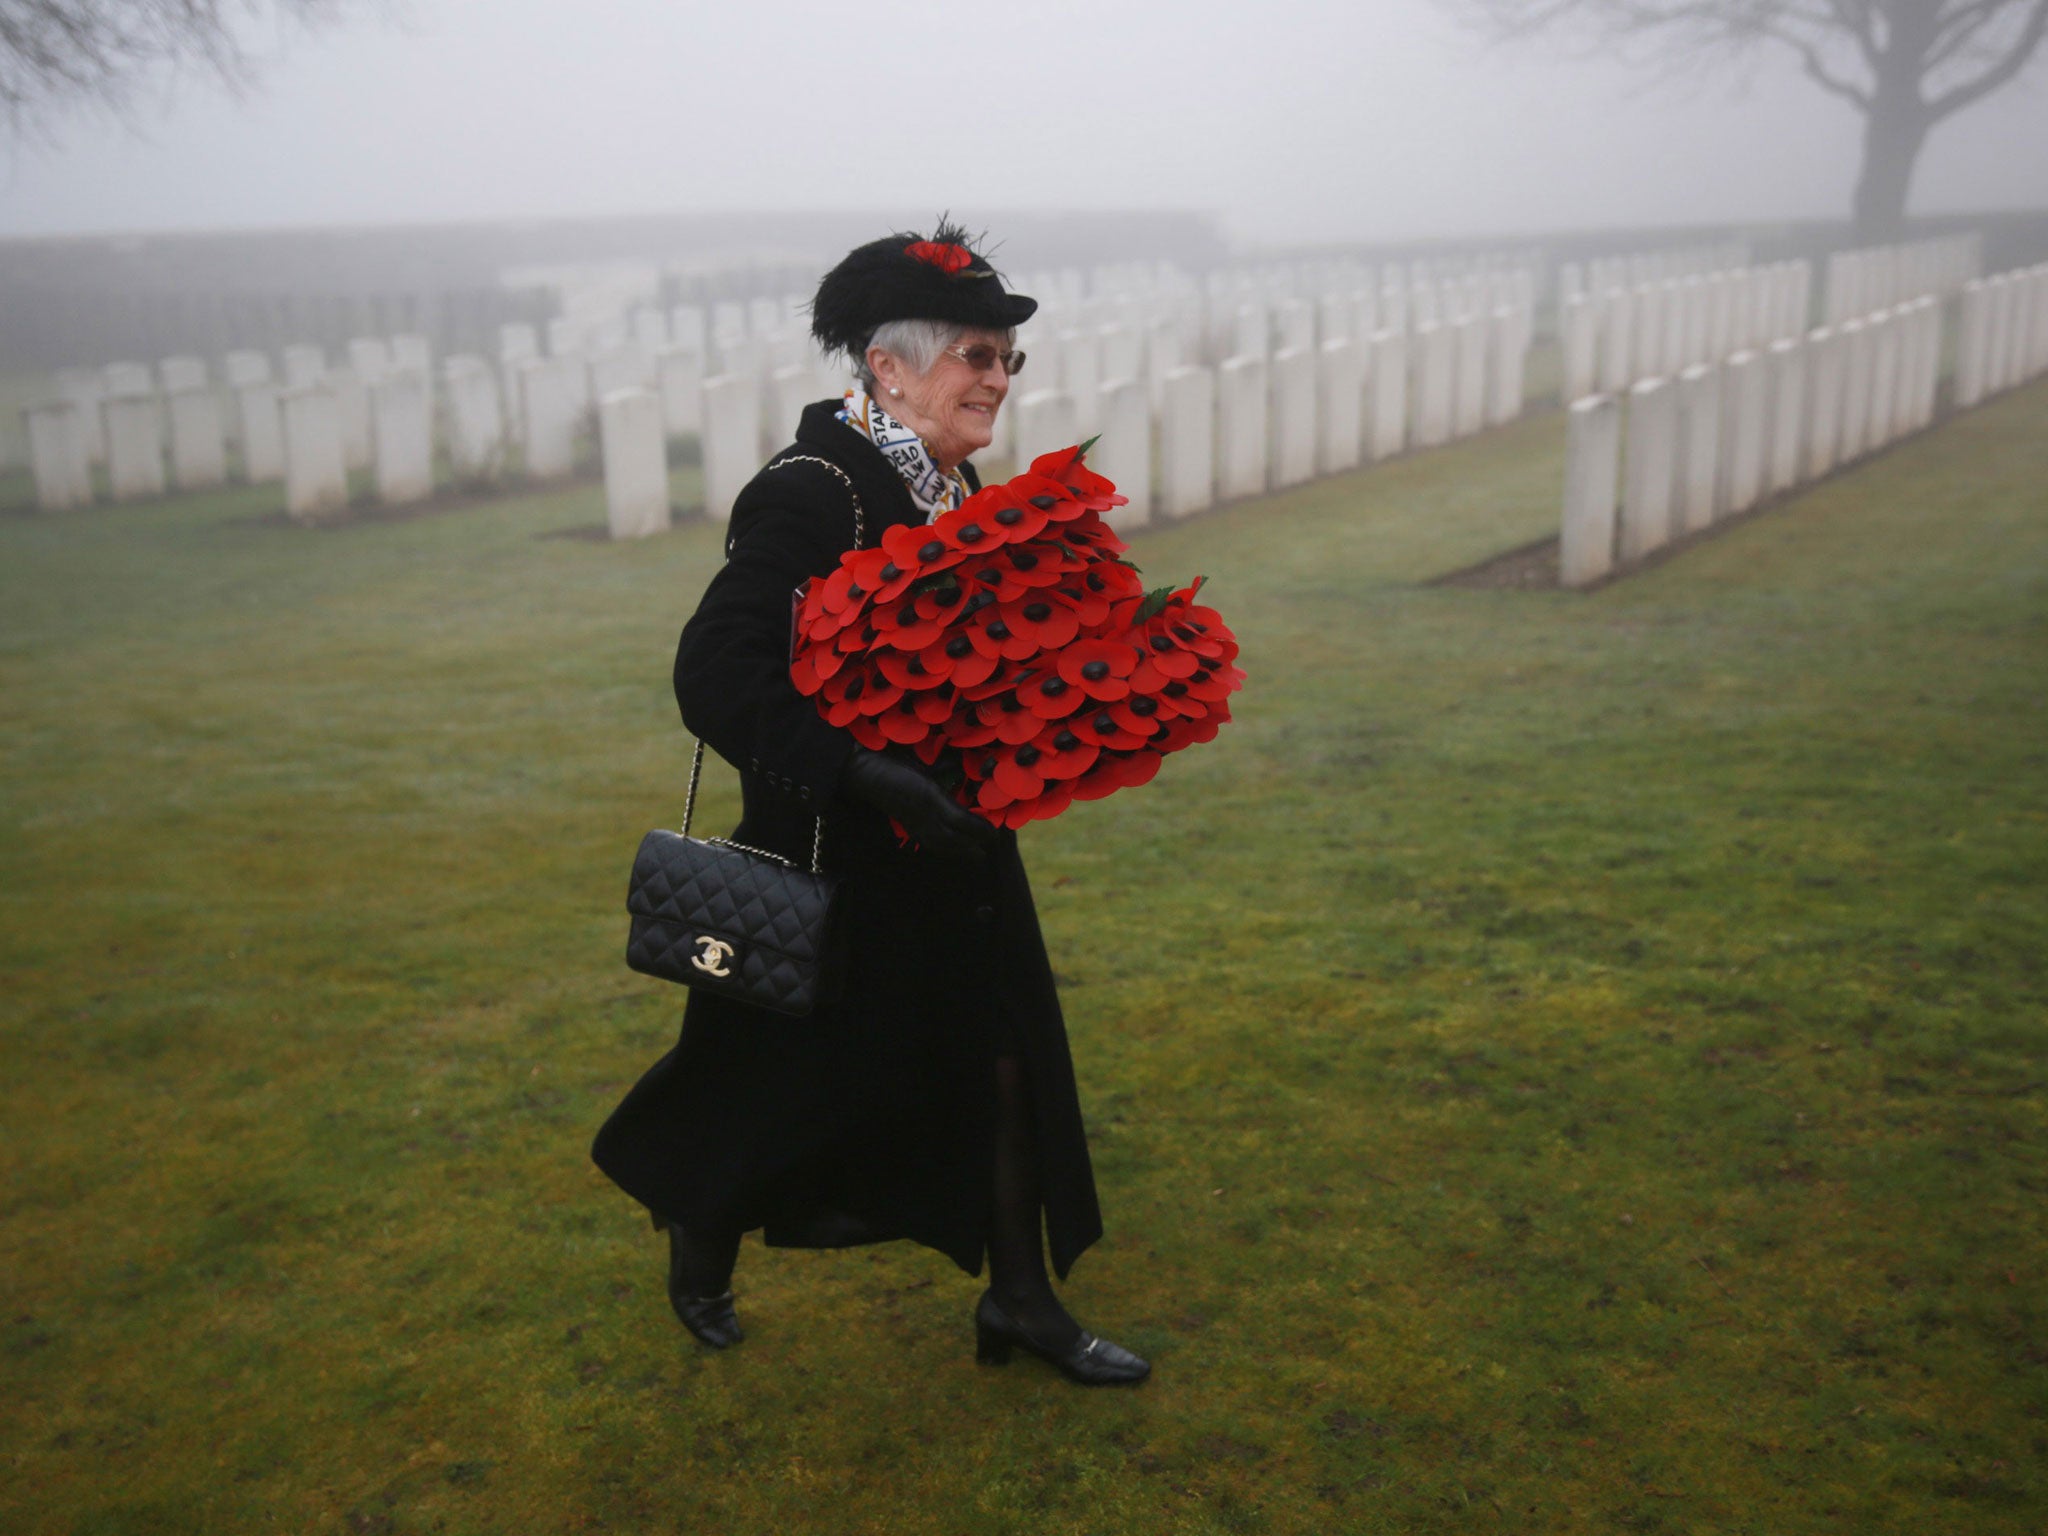 A mourner carries wreaths before the re-burial of Private William McAleer at Loos British Cemetery in Loos-en-Gohelle